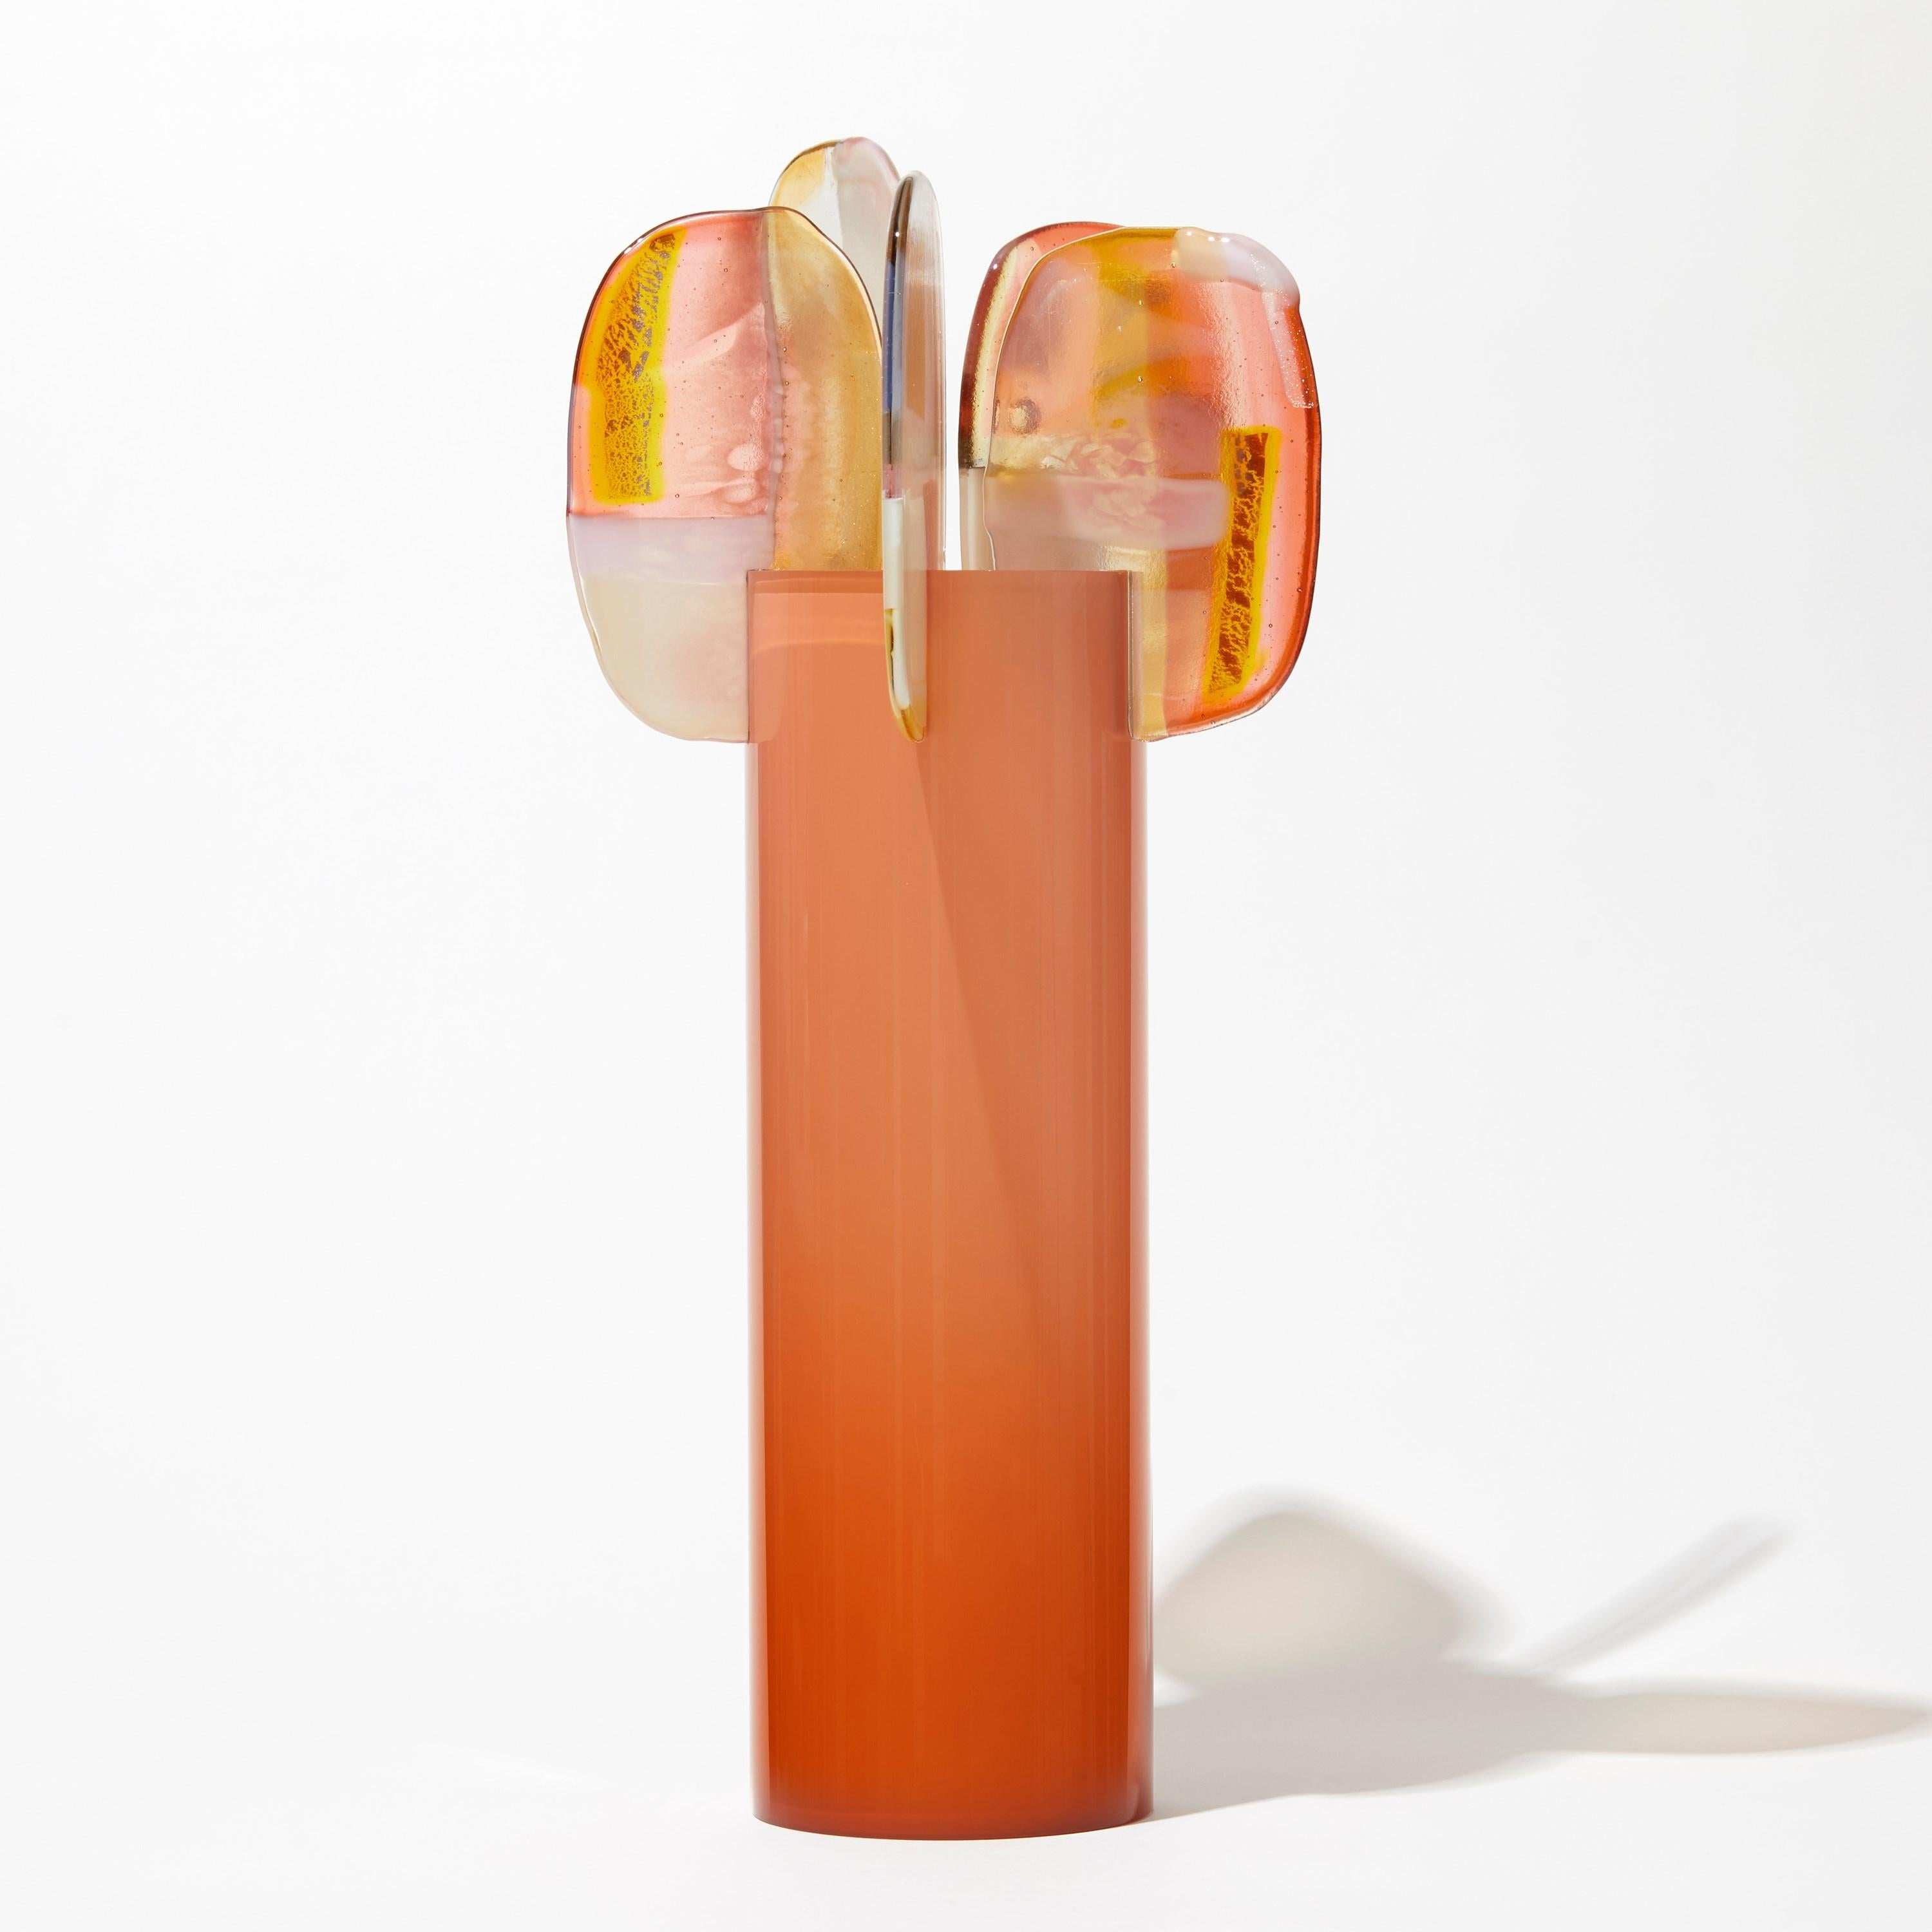 ''Paradise 06 in Orange Opal'' is a unique glass sculpture created using hybrid hand-made glass techniques by the British artist Amy Cushing. Combining mouth blown glass with kiln formed glass, each piece within the collection displays a multiple of